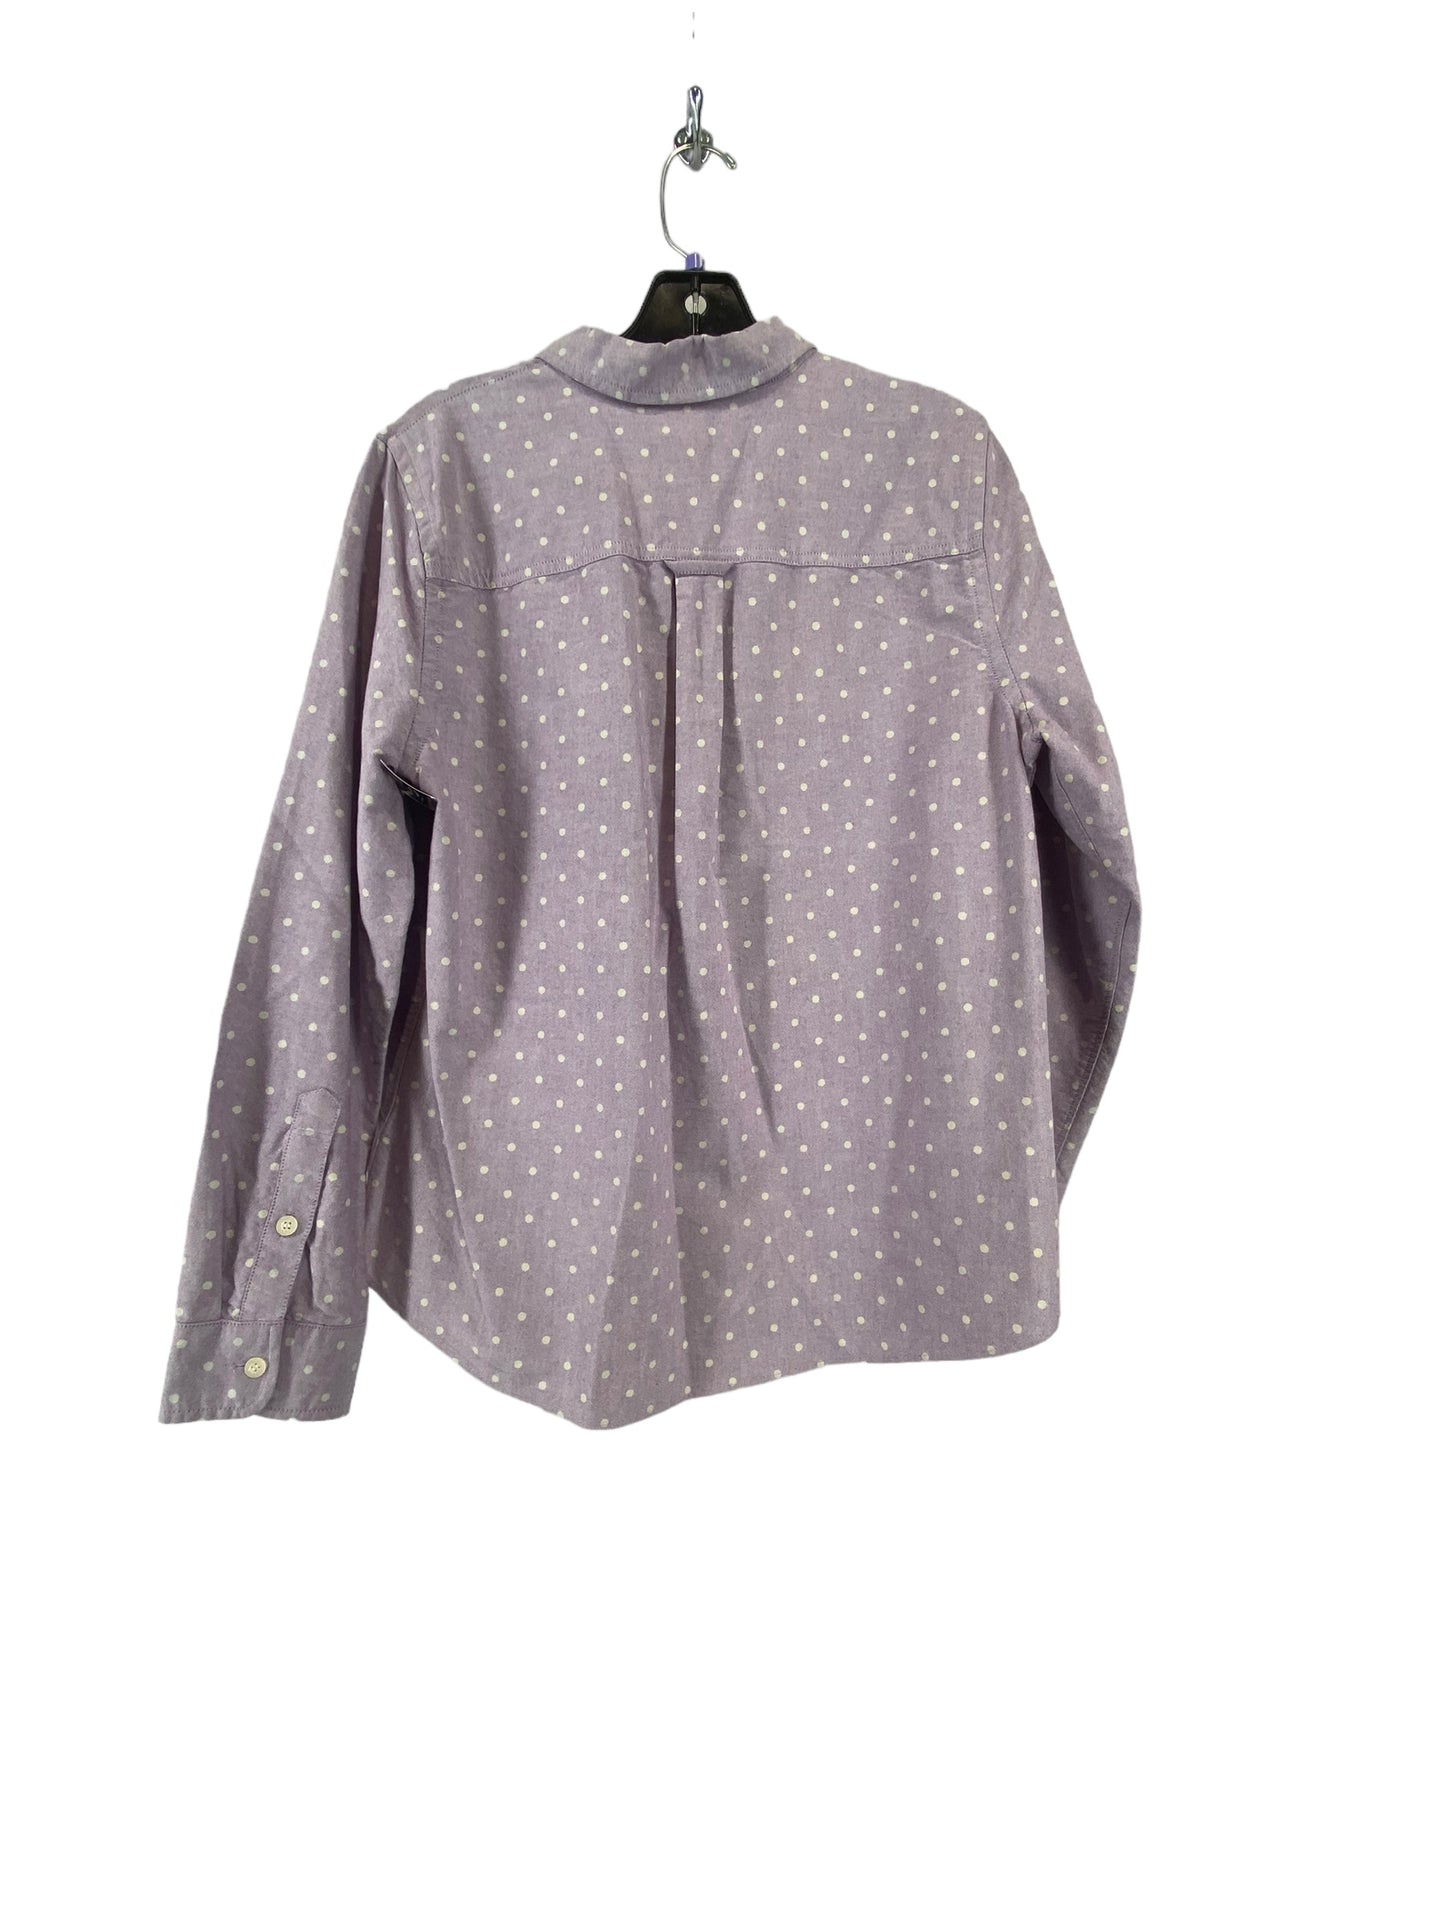 Purple Blouse Long Sleeve Madewell, Size L